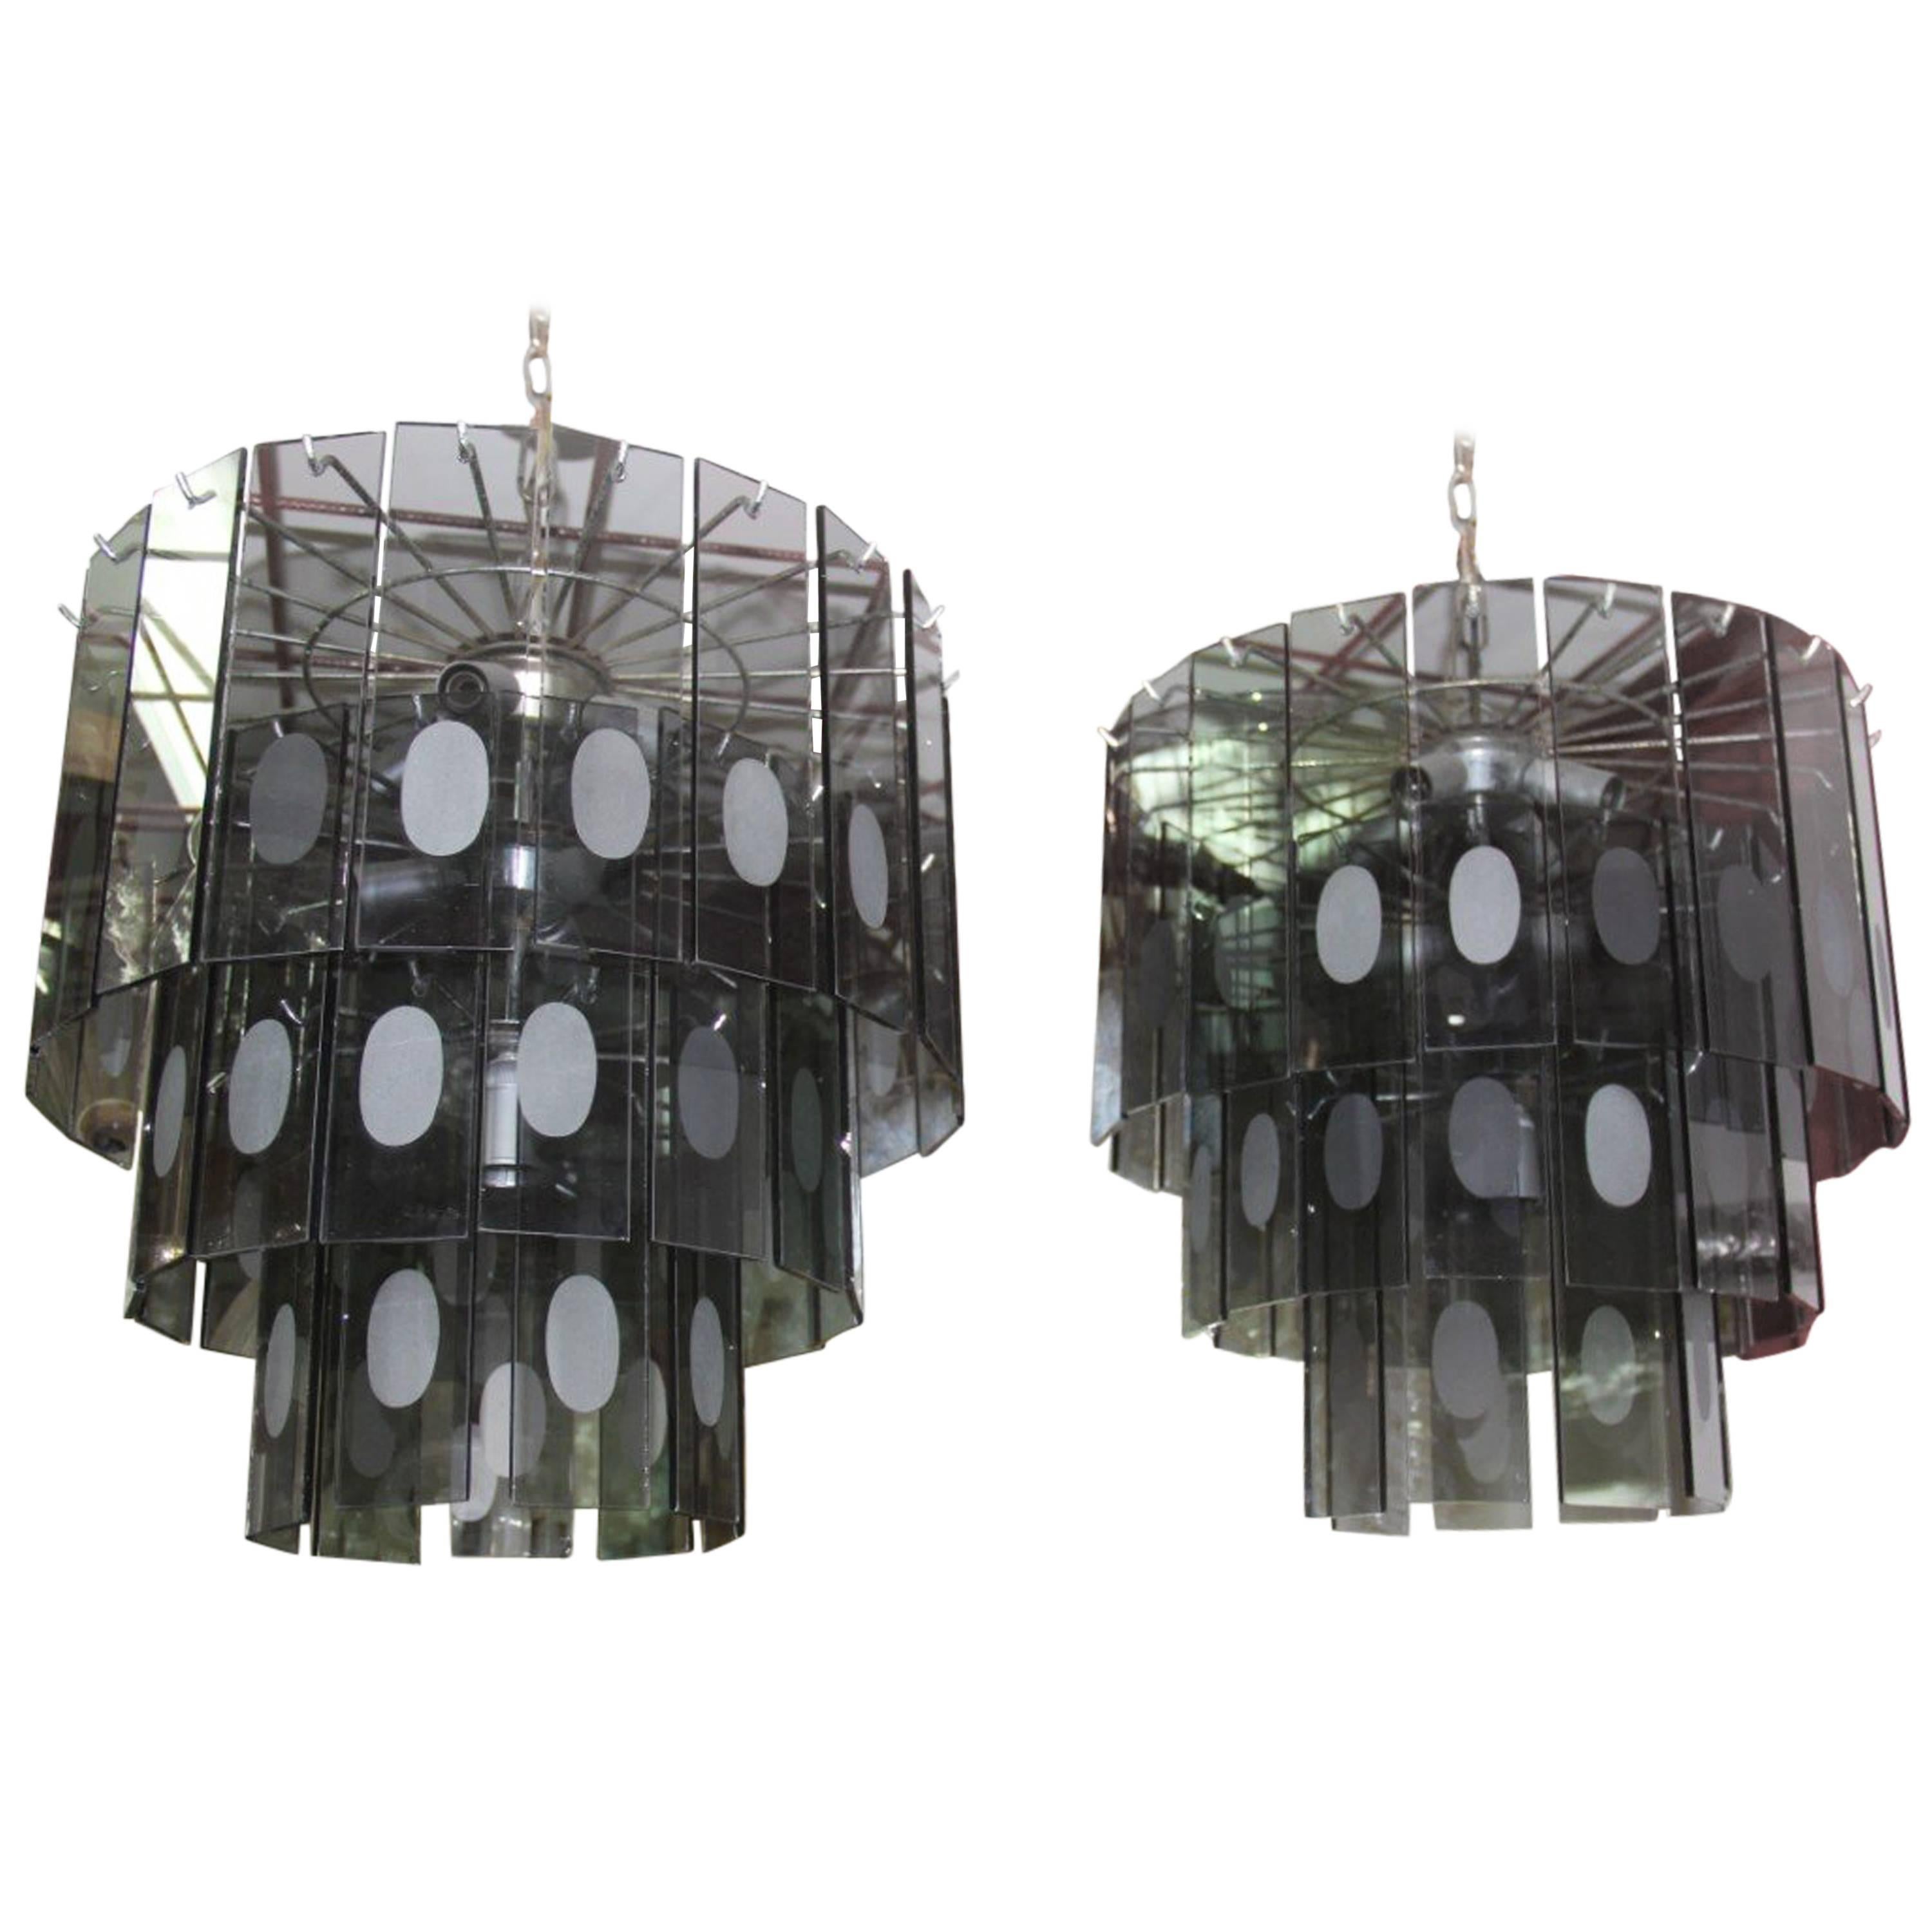 Pair of Gray Glass Chandeliers, 1970 Italian Design For Sale